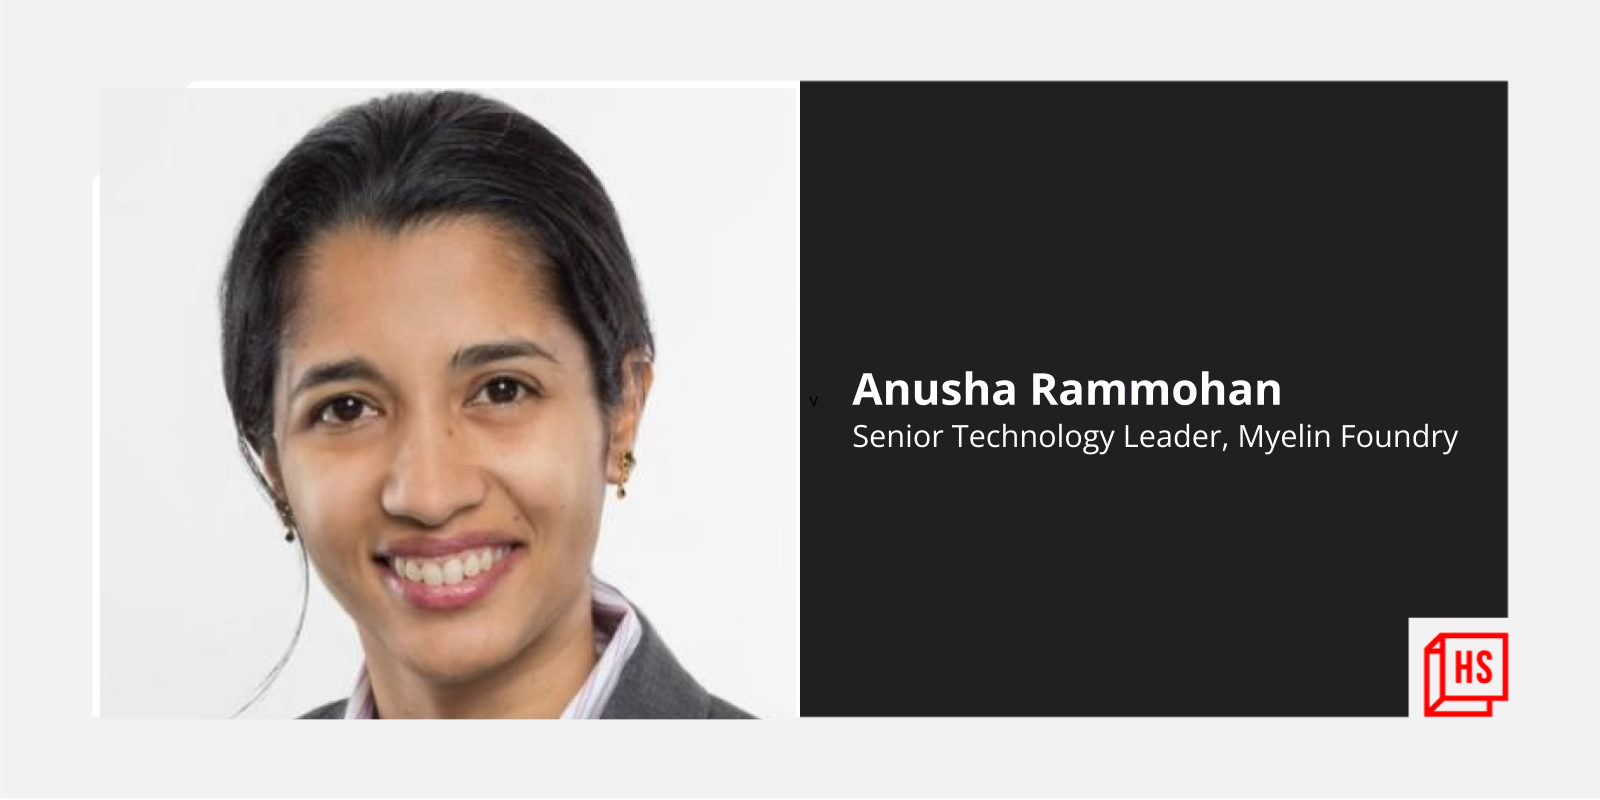 [Women in Tech] Organisations need to offer flexibility and support to attract and retain women, says Anusha Rammohan of Myelin Foundry